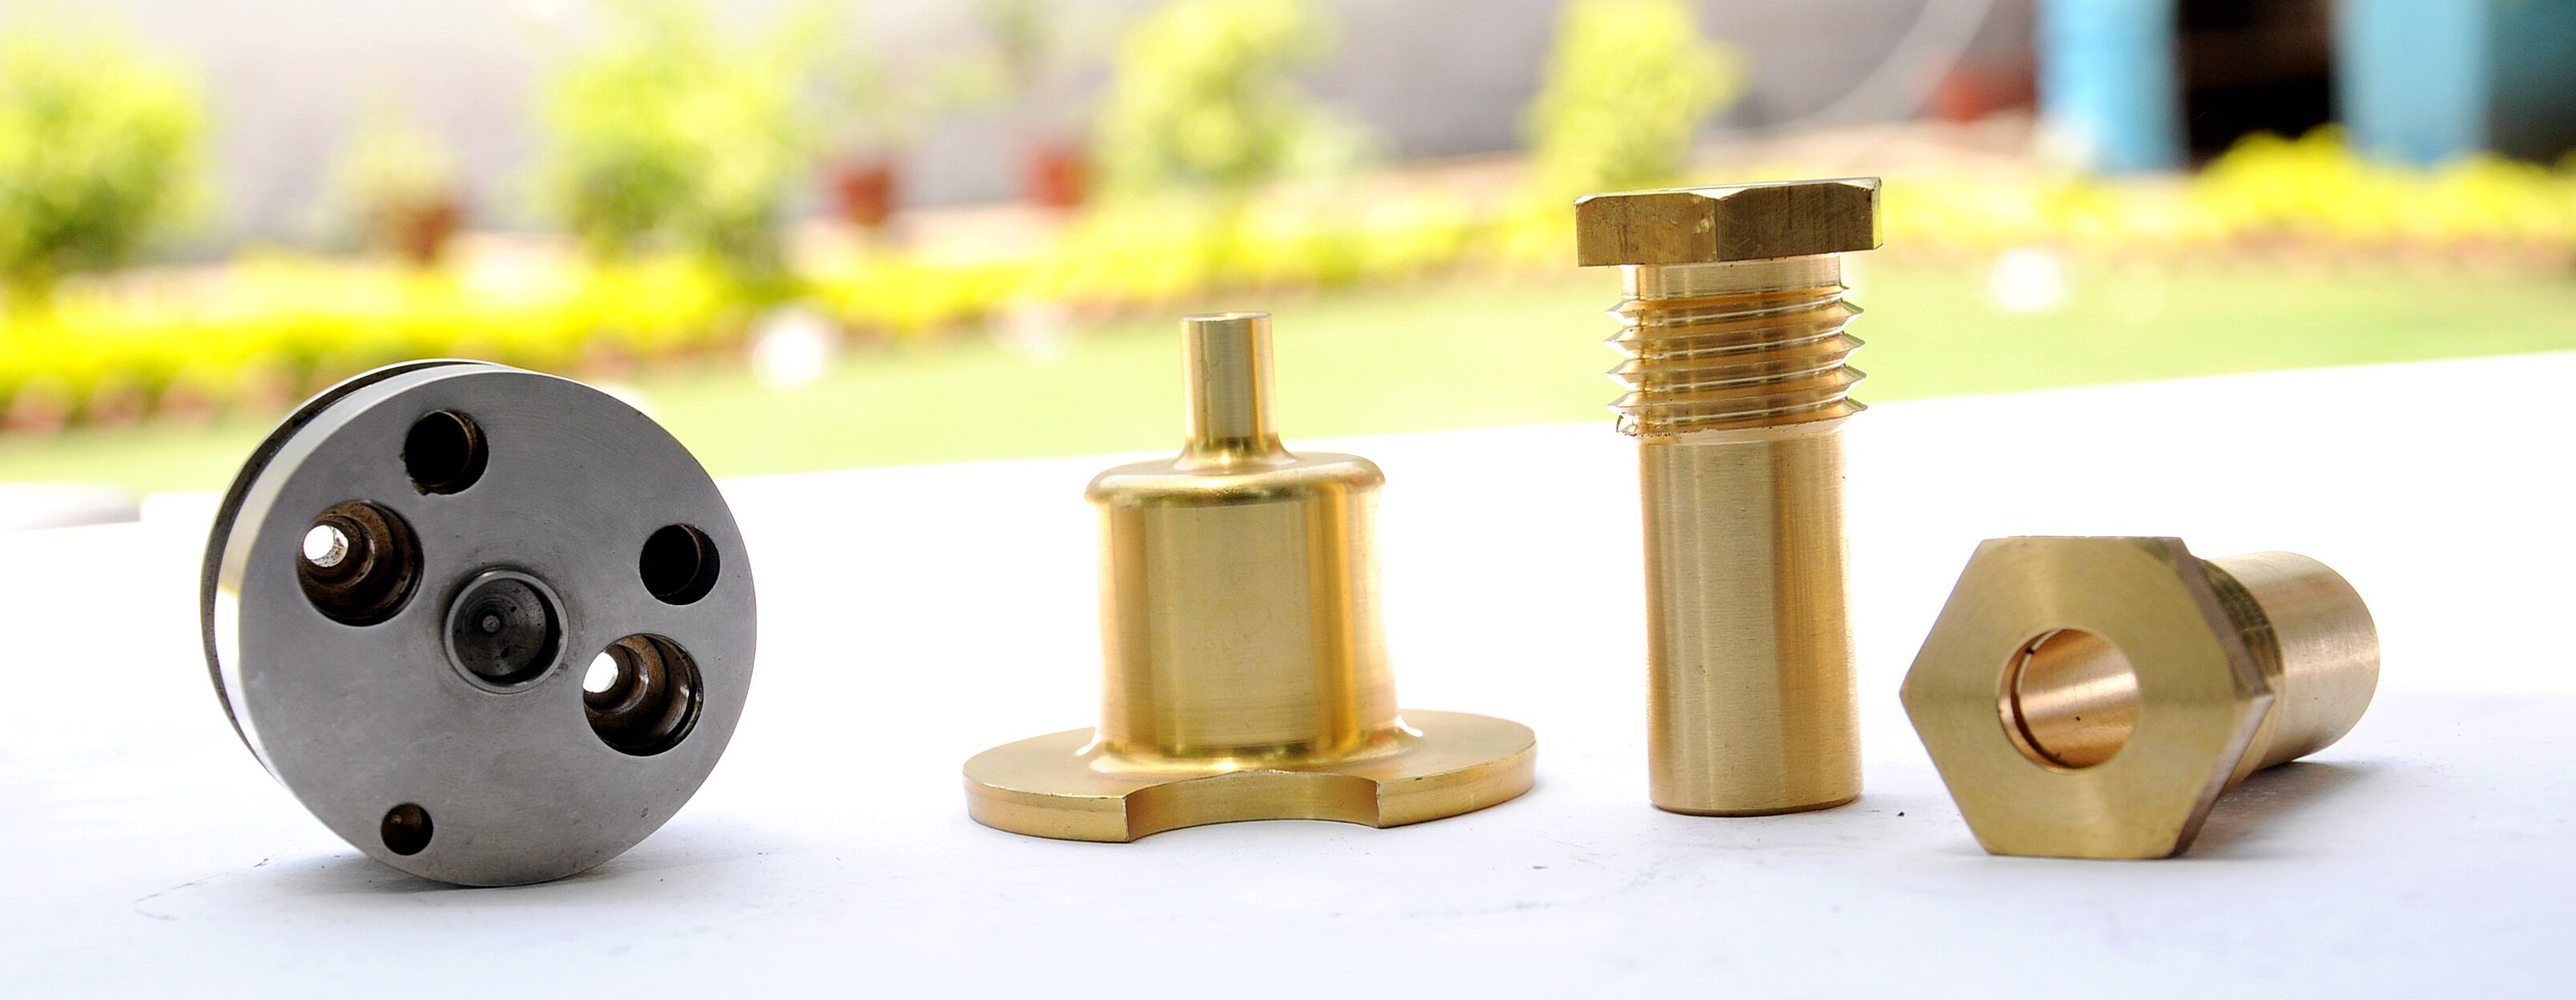 Brass Components & Parts Manufacturers